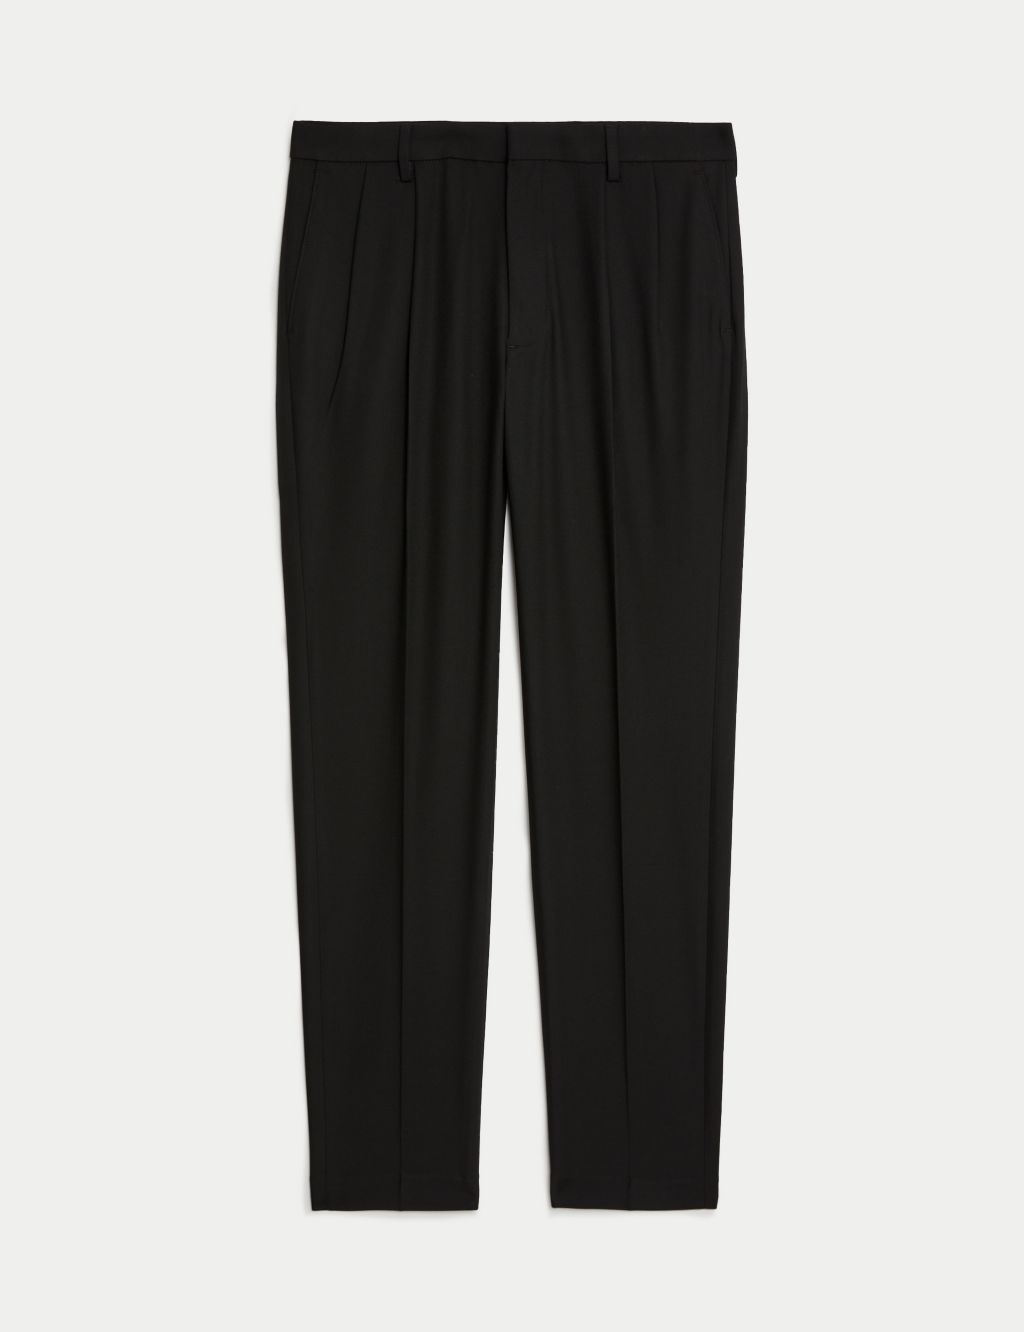 Twin Pleat Stretch Trousers image 3